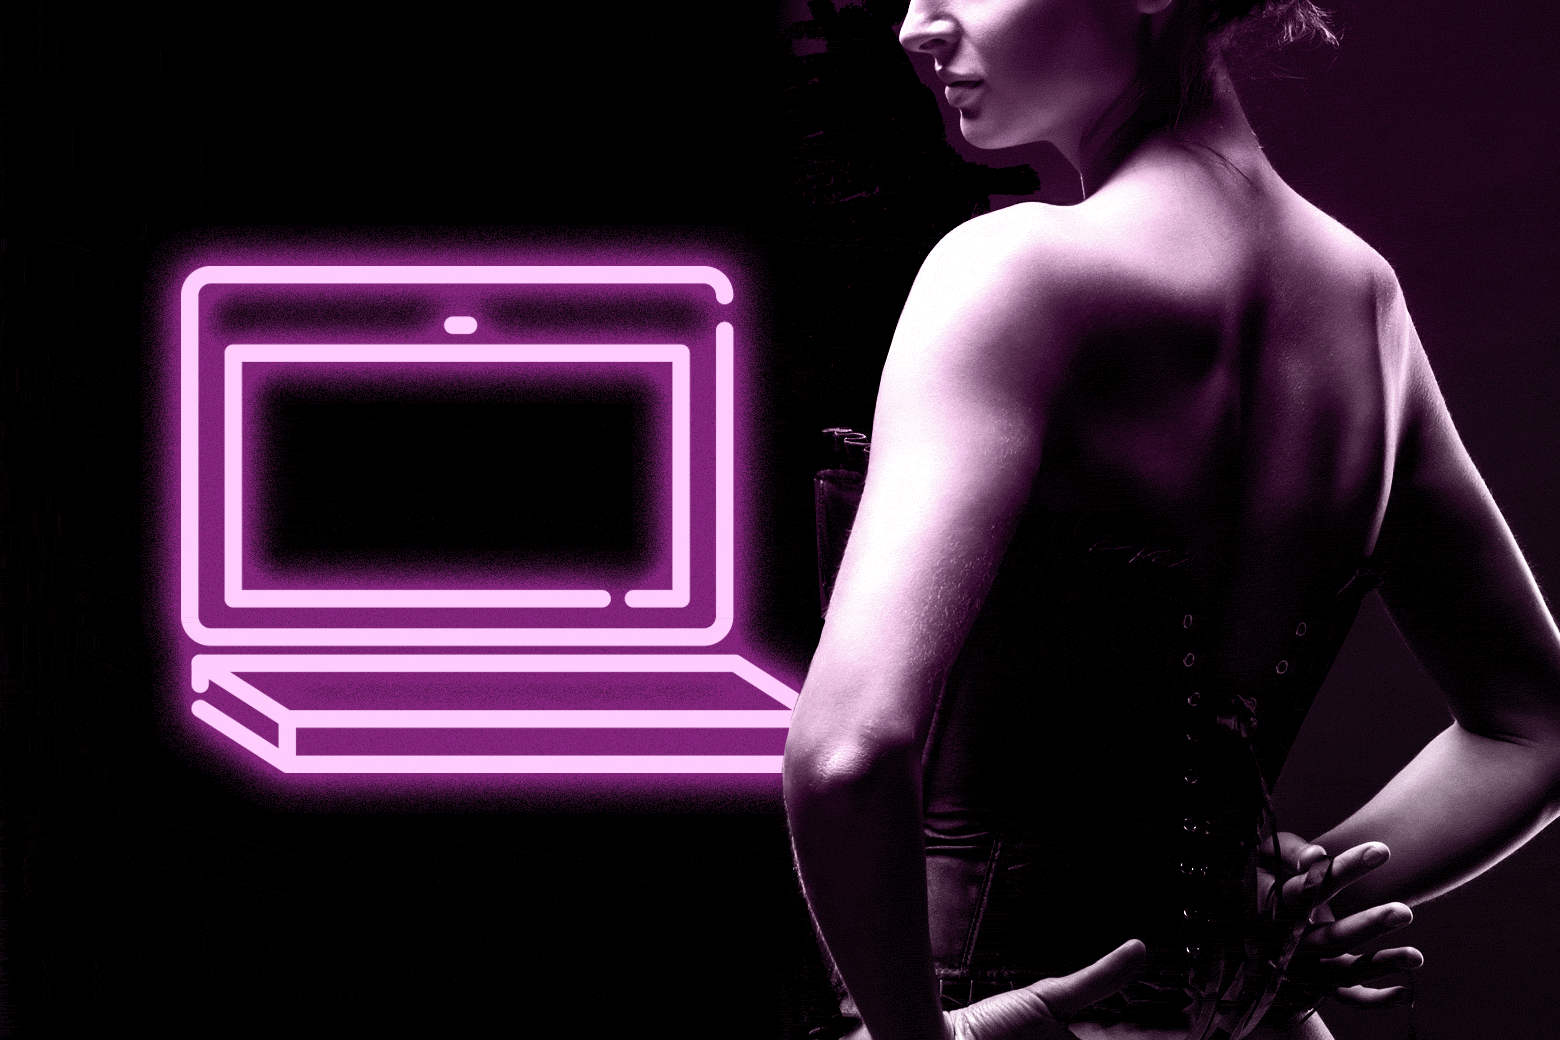 GIF of a scantily dressed woman standing in front of a neon computer.